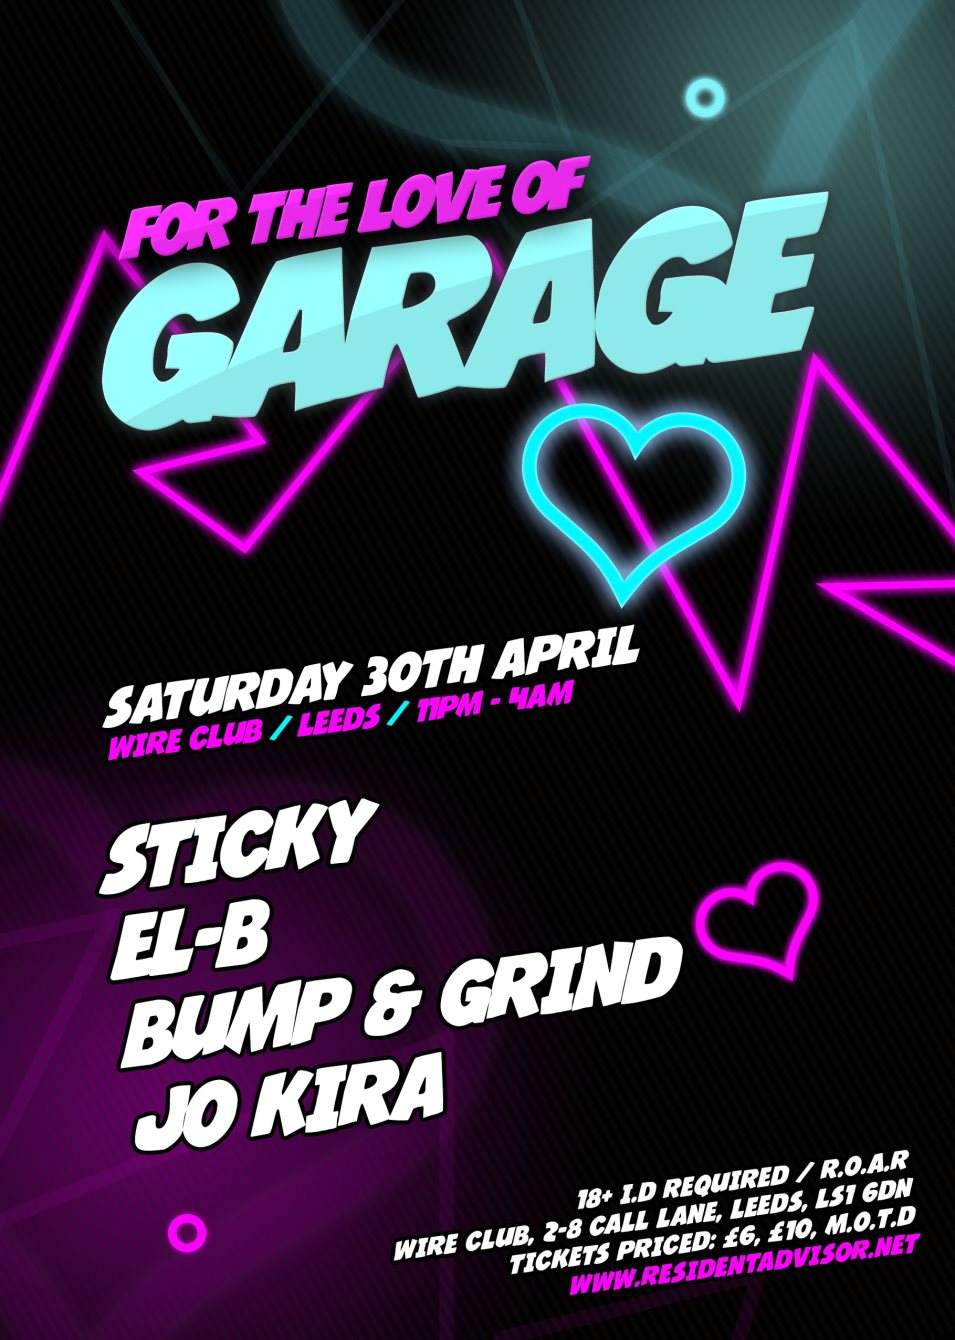 For the Love of Garage - Sticky / El-B / Bump & Grind - フライヤー表